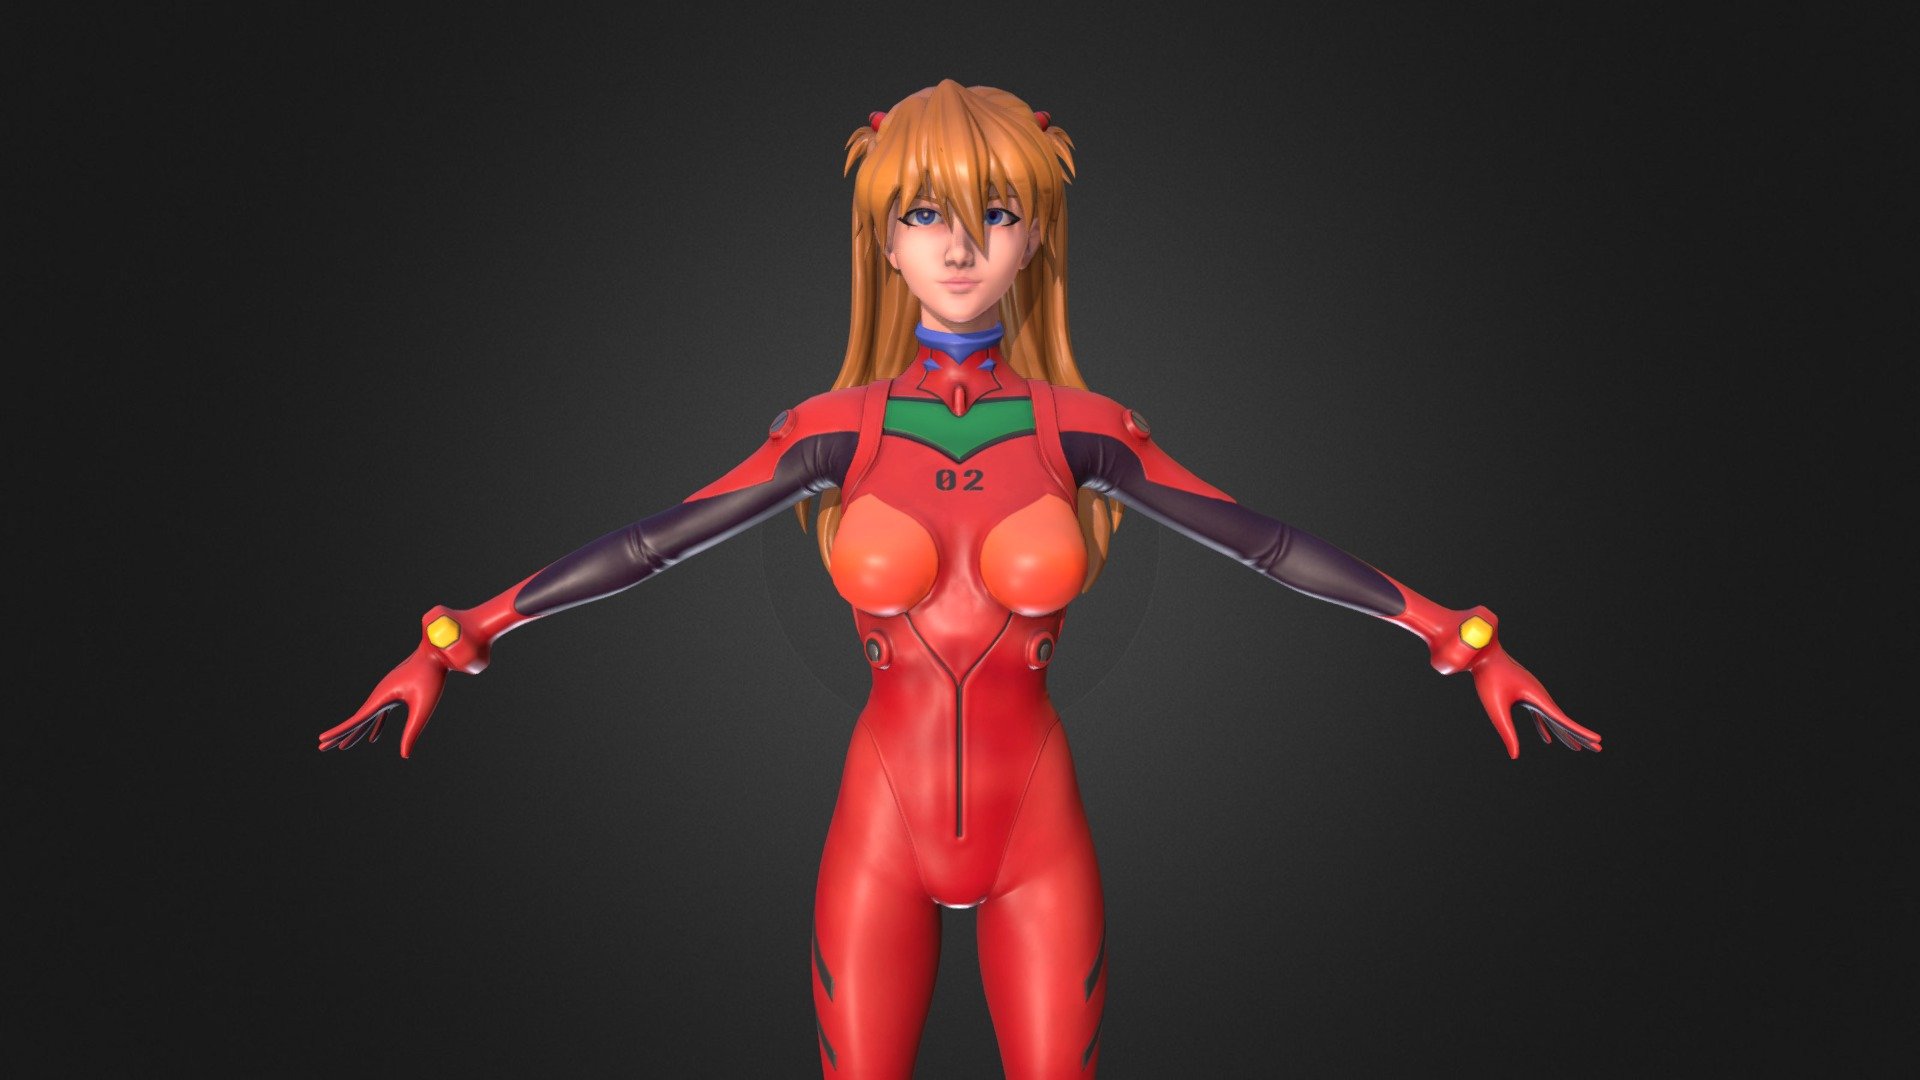 Hi
My name is CheRa and I am learning 3D modeling. This is Asuka Langley. The character designs were mostly based on the Evangelion TV series.

Would you like to know more? 

Portfolio: https://www.artstation.com/chera3d

YouTube: https://www.youtube.com/c/chera3d

Discord server: https://discord.gg/gCmquSA6m6

Like and Follow me on artstation and youtube. This is very important for me. Thx a lot!!! - Asuka Langley A-Pose - Download Free 3D model by CheRa (@chera3d) 3d model